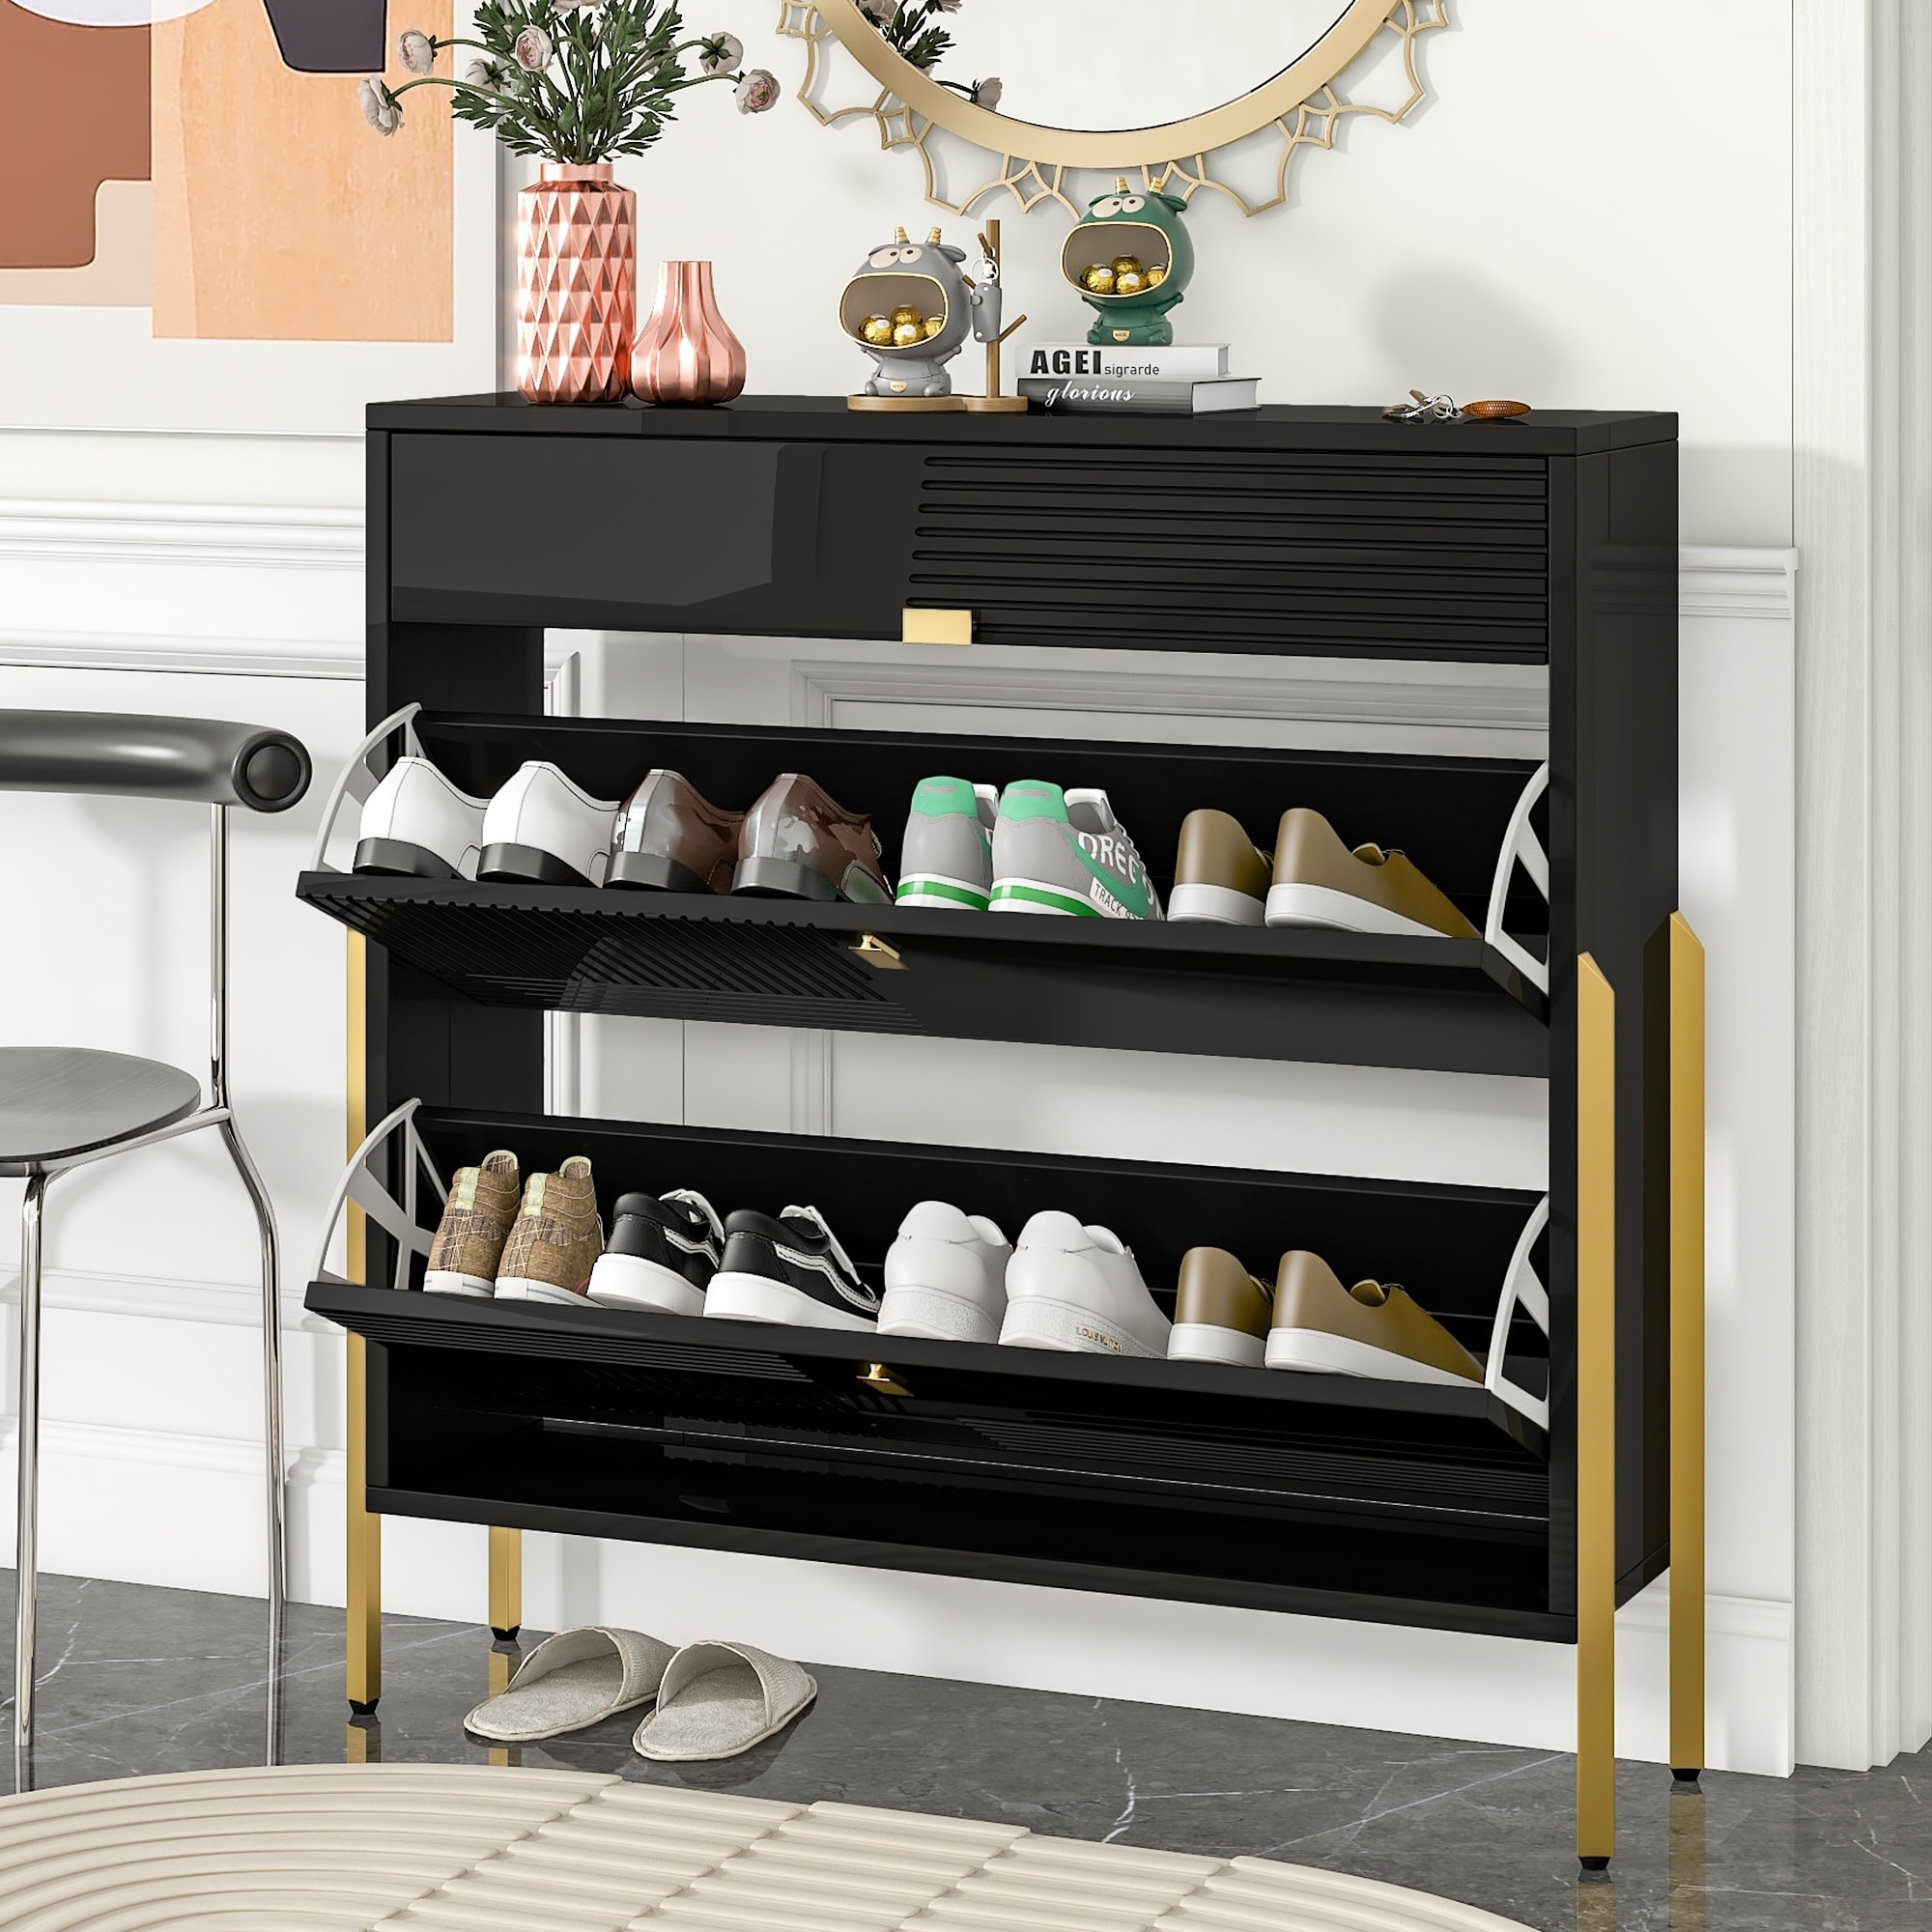 https://ak1.ostkcdn.com/images/products/is/images/direct/5e5b16d736776aeb548cd6faaa99eda61d699736/Shoe-Cabinet-with-2-Flip-Drawers-%26-1-Slide-Drawer.jpg